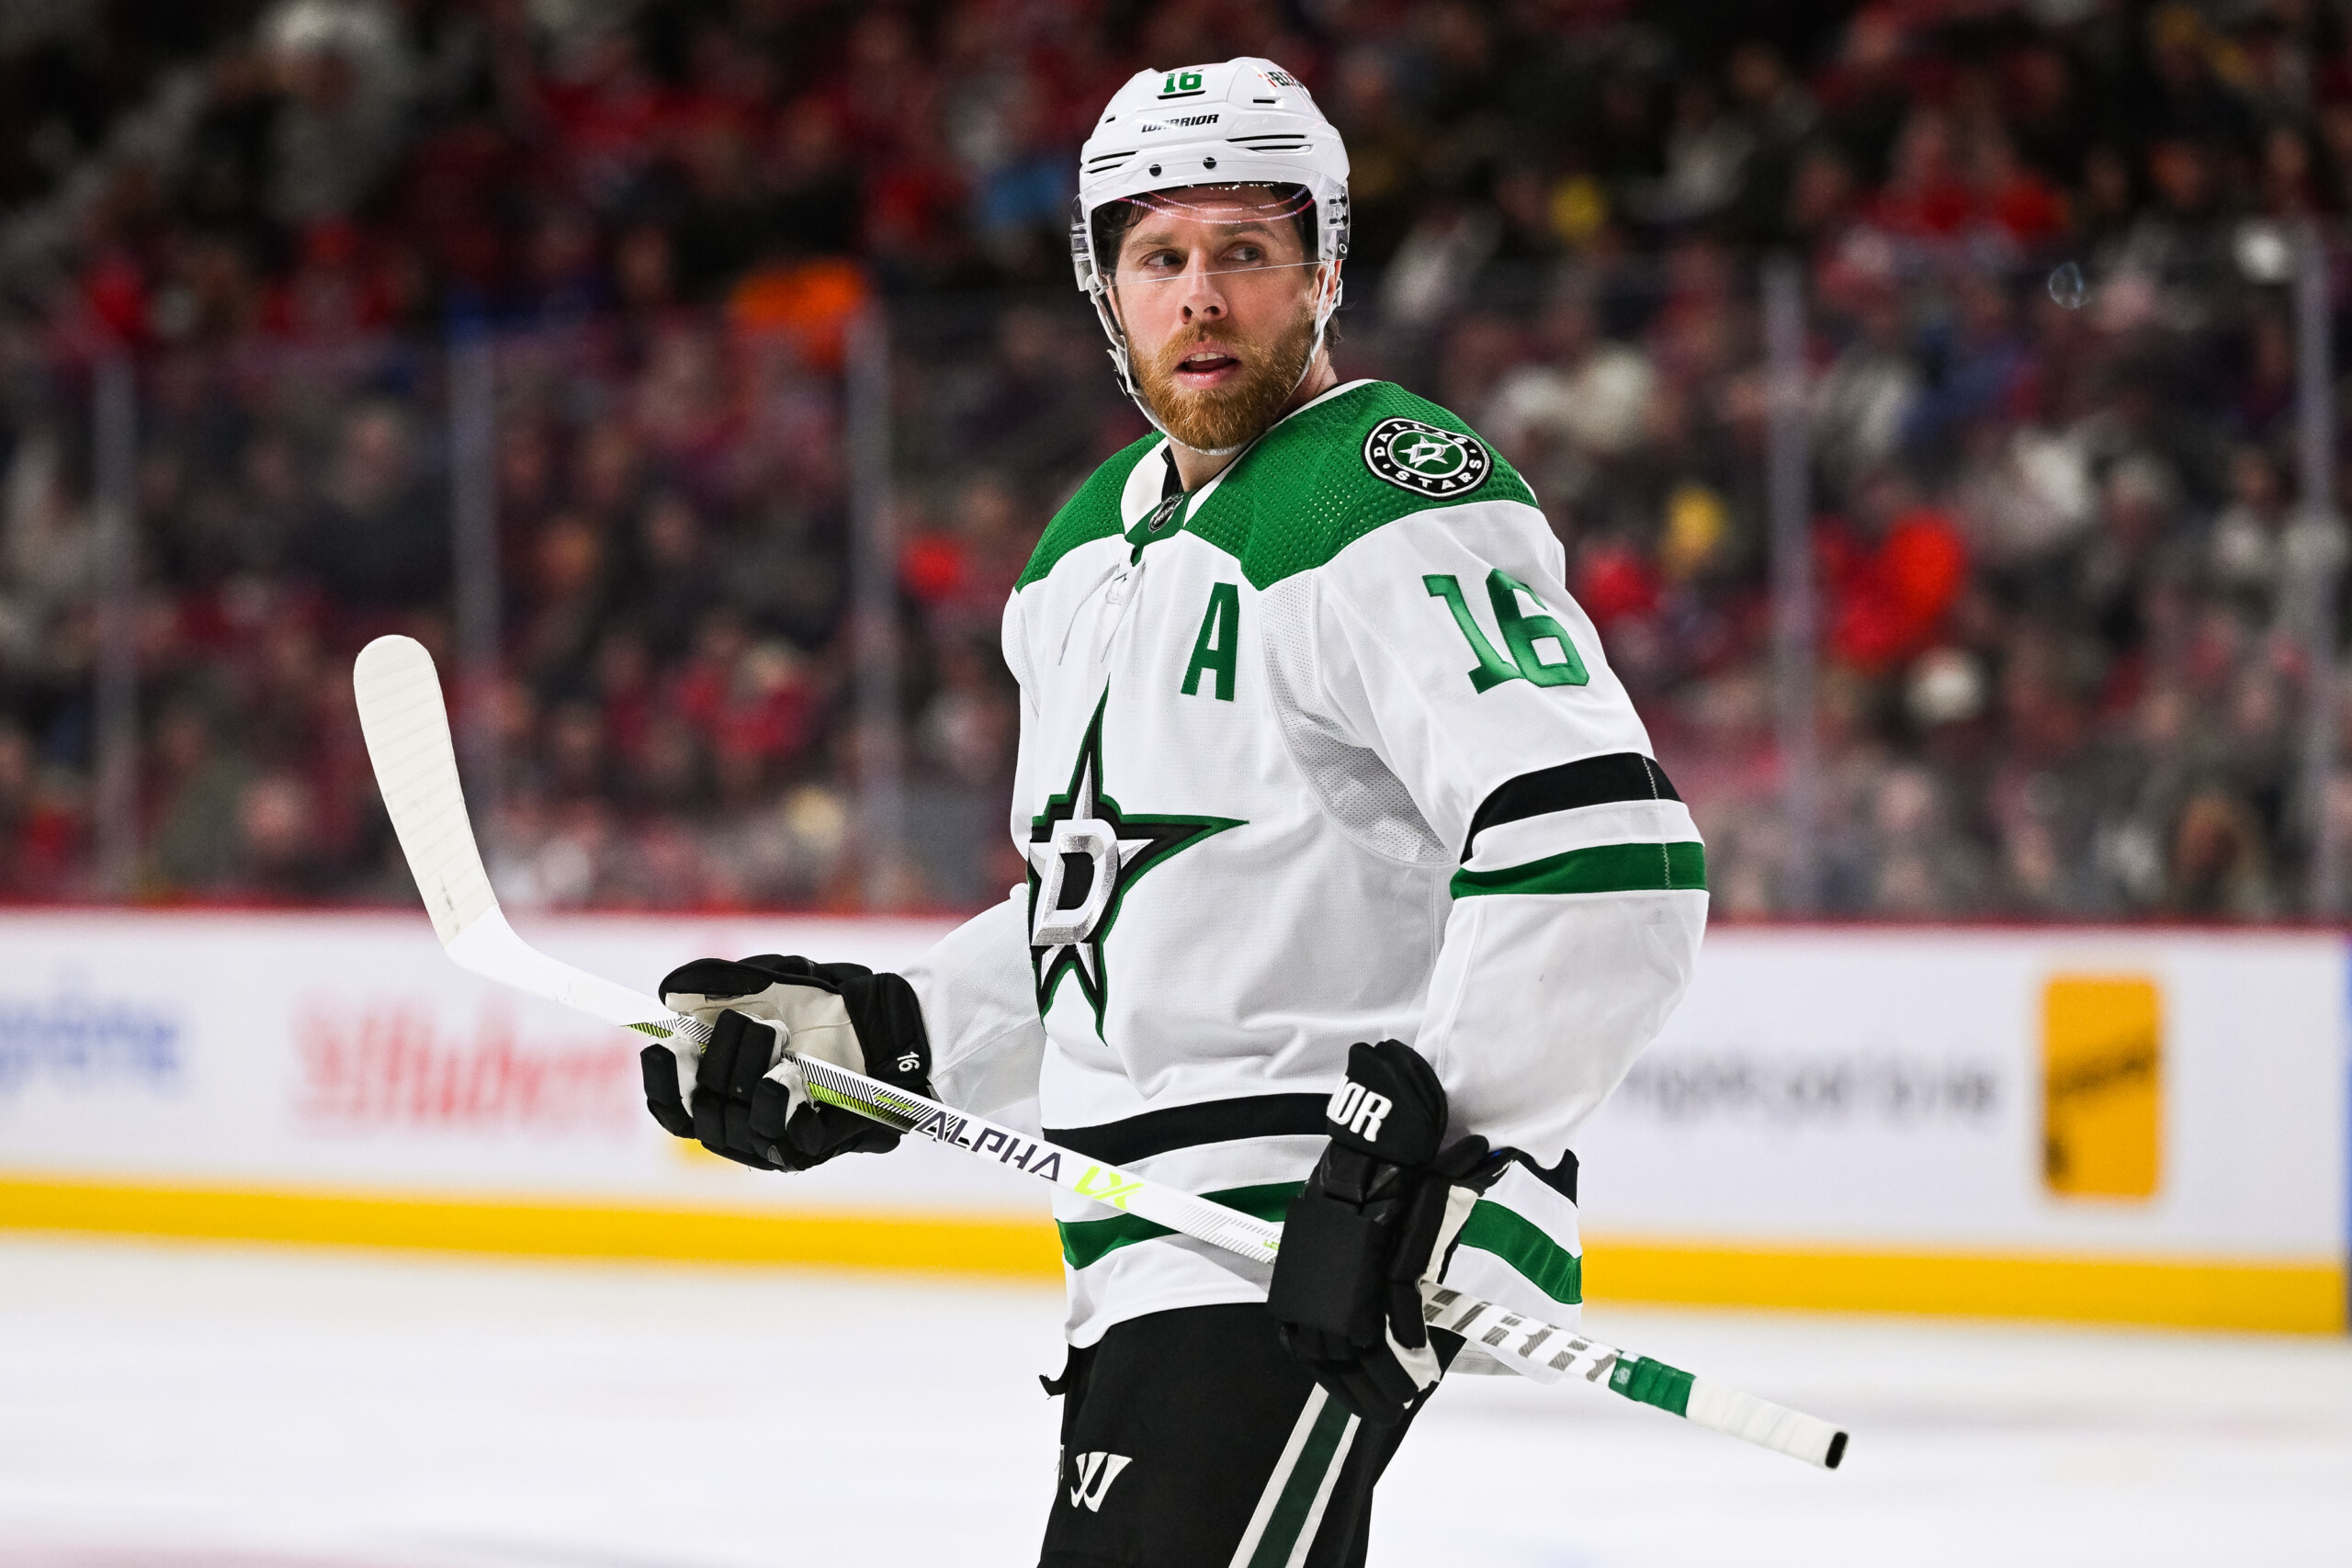 After a rough start to the season, Joe Pavelski is showing his value to the  Stars